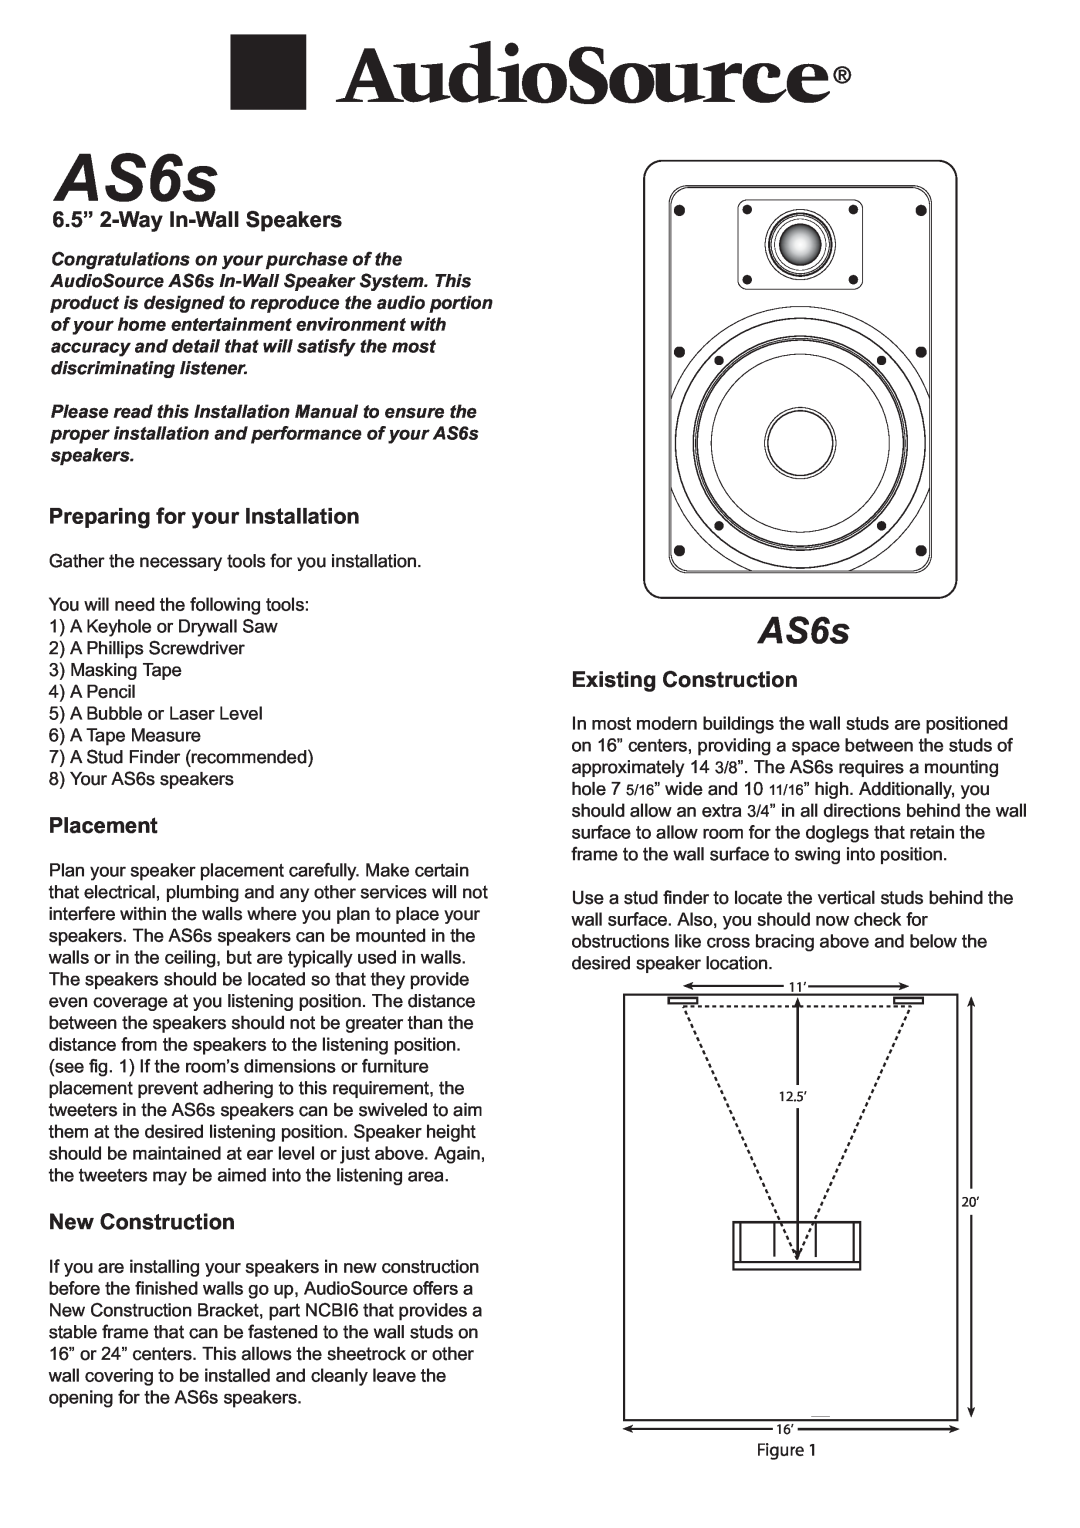 AudioSource 6.5" 2-Way In-Wall Speakers, AS6s manual 